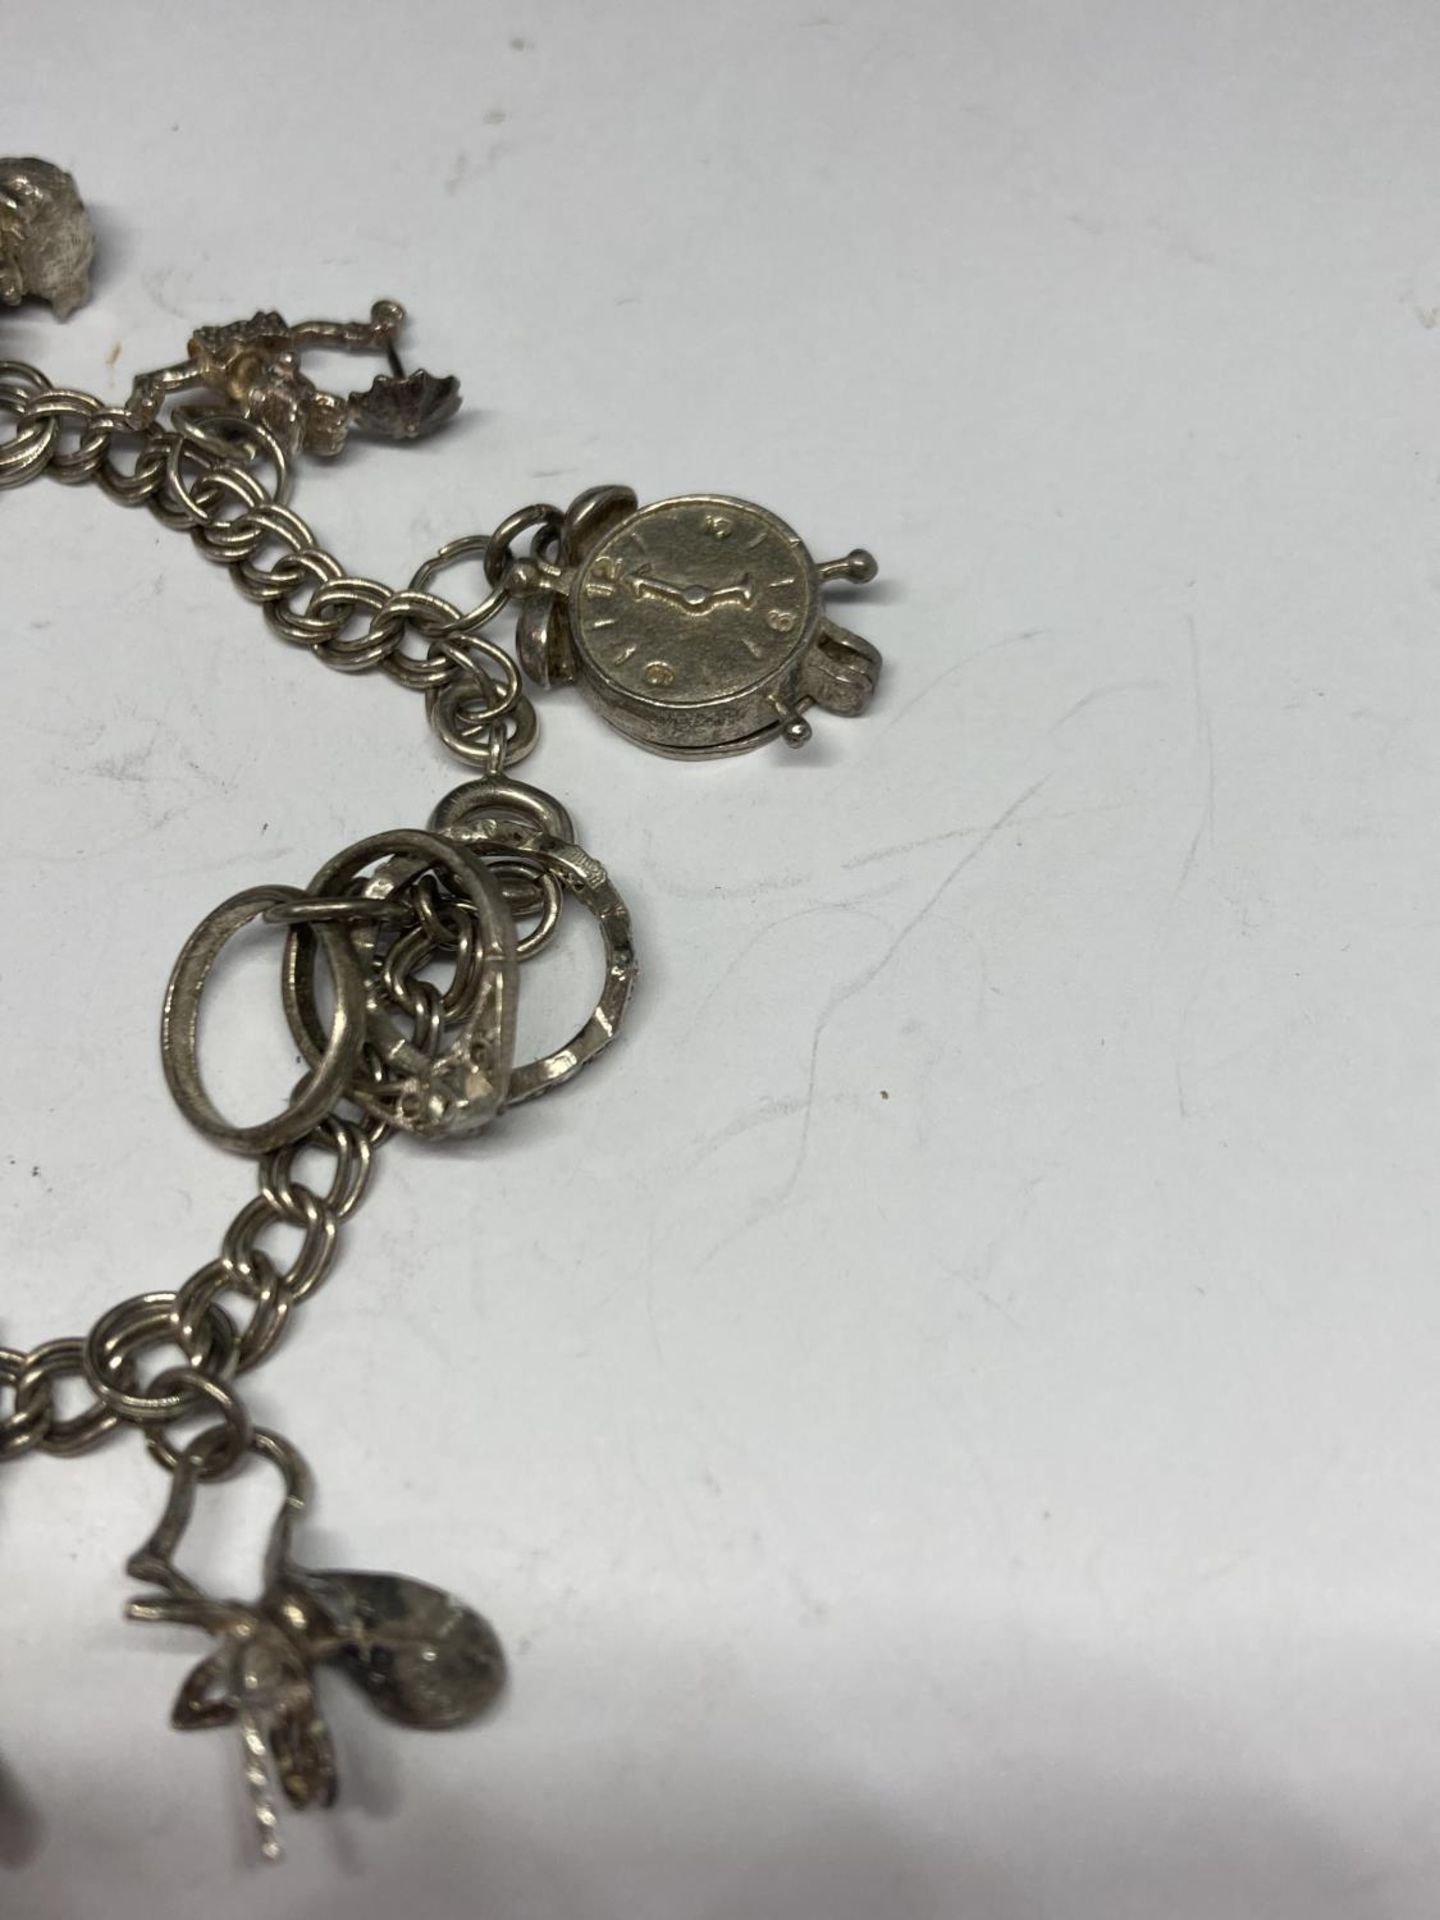 A SILVER CHARM BRACELET WITH TEN CHARMS - Image 2 of 4